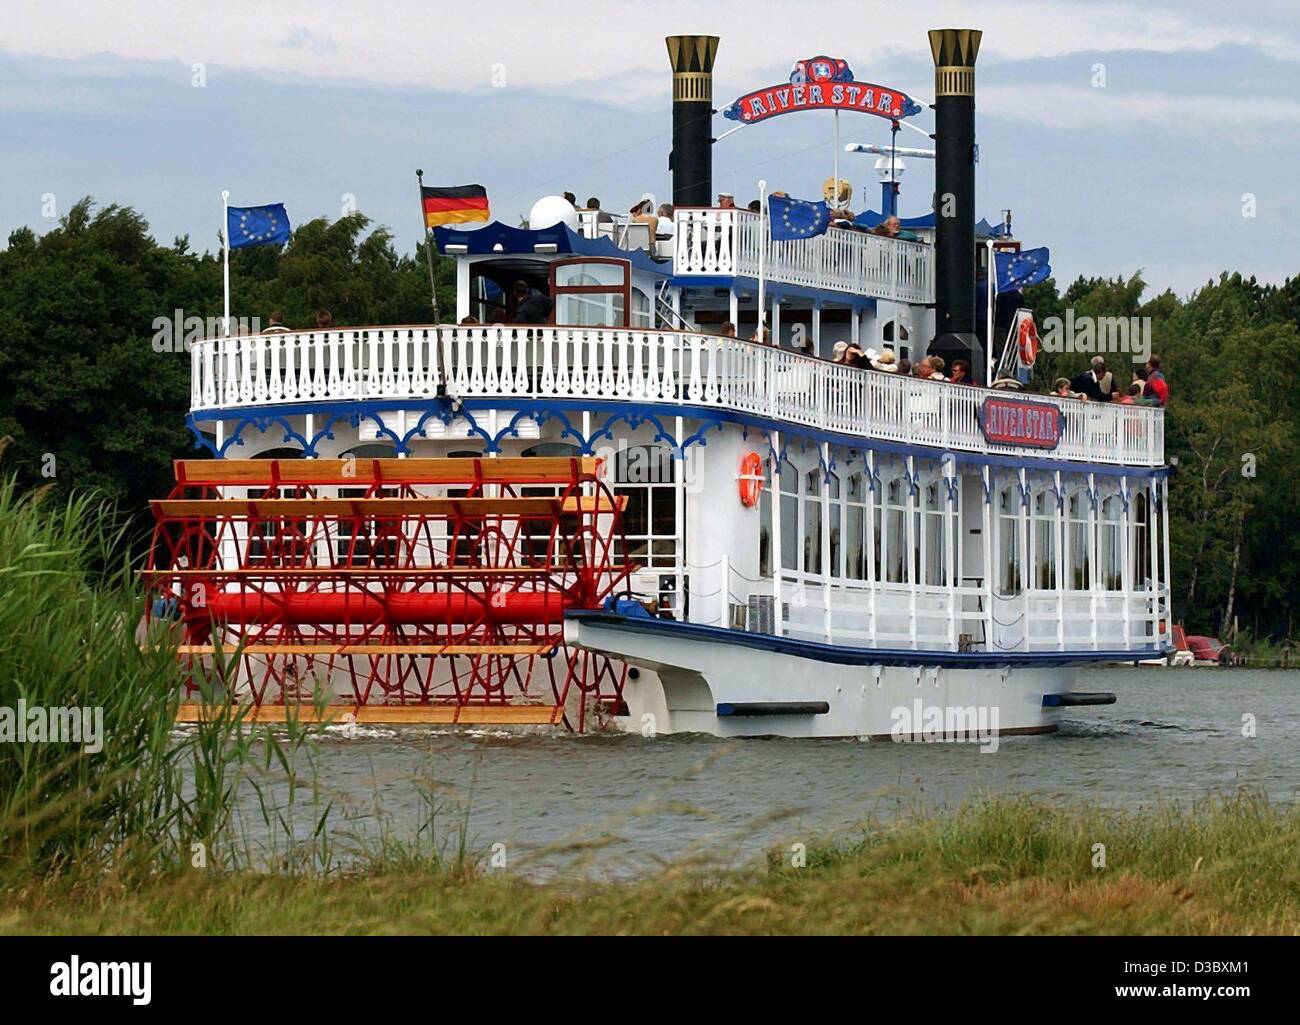 (dpa) - Not on the Mississippi but on the Prerow River the paddle steamer River Star cruises along, in Born, northern Germany, 3 July 2003. The 33 m long ship was constructed in Kosel, Poland, and cruises daily on the lakes of the national park Vorpommersche Boddenlandschaft. Stock Photo